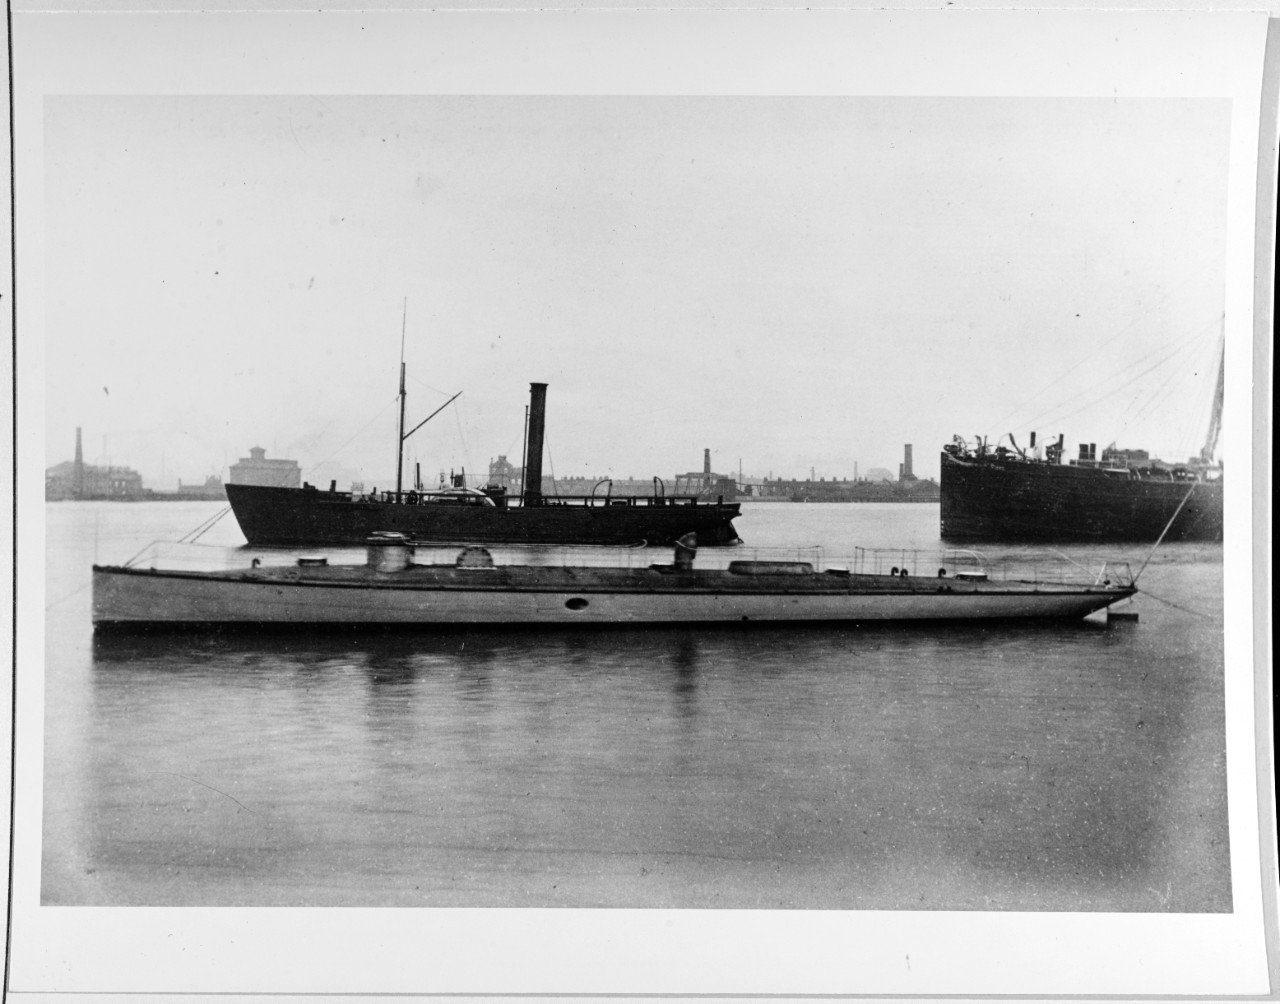 "Torpedo boat, built for the English government, March 1879."